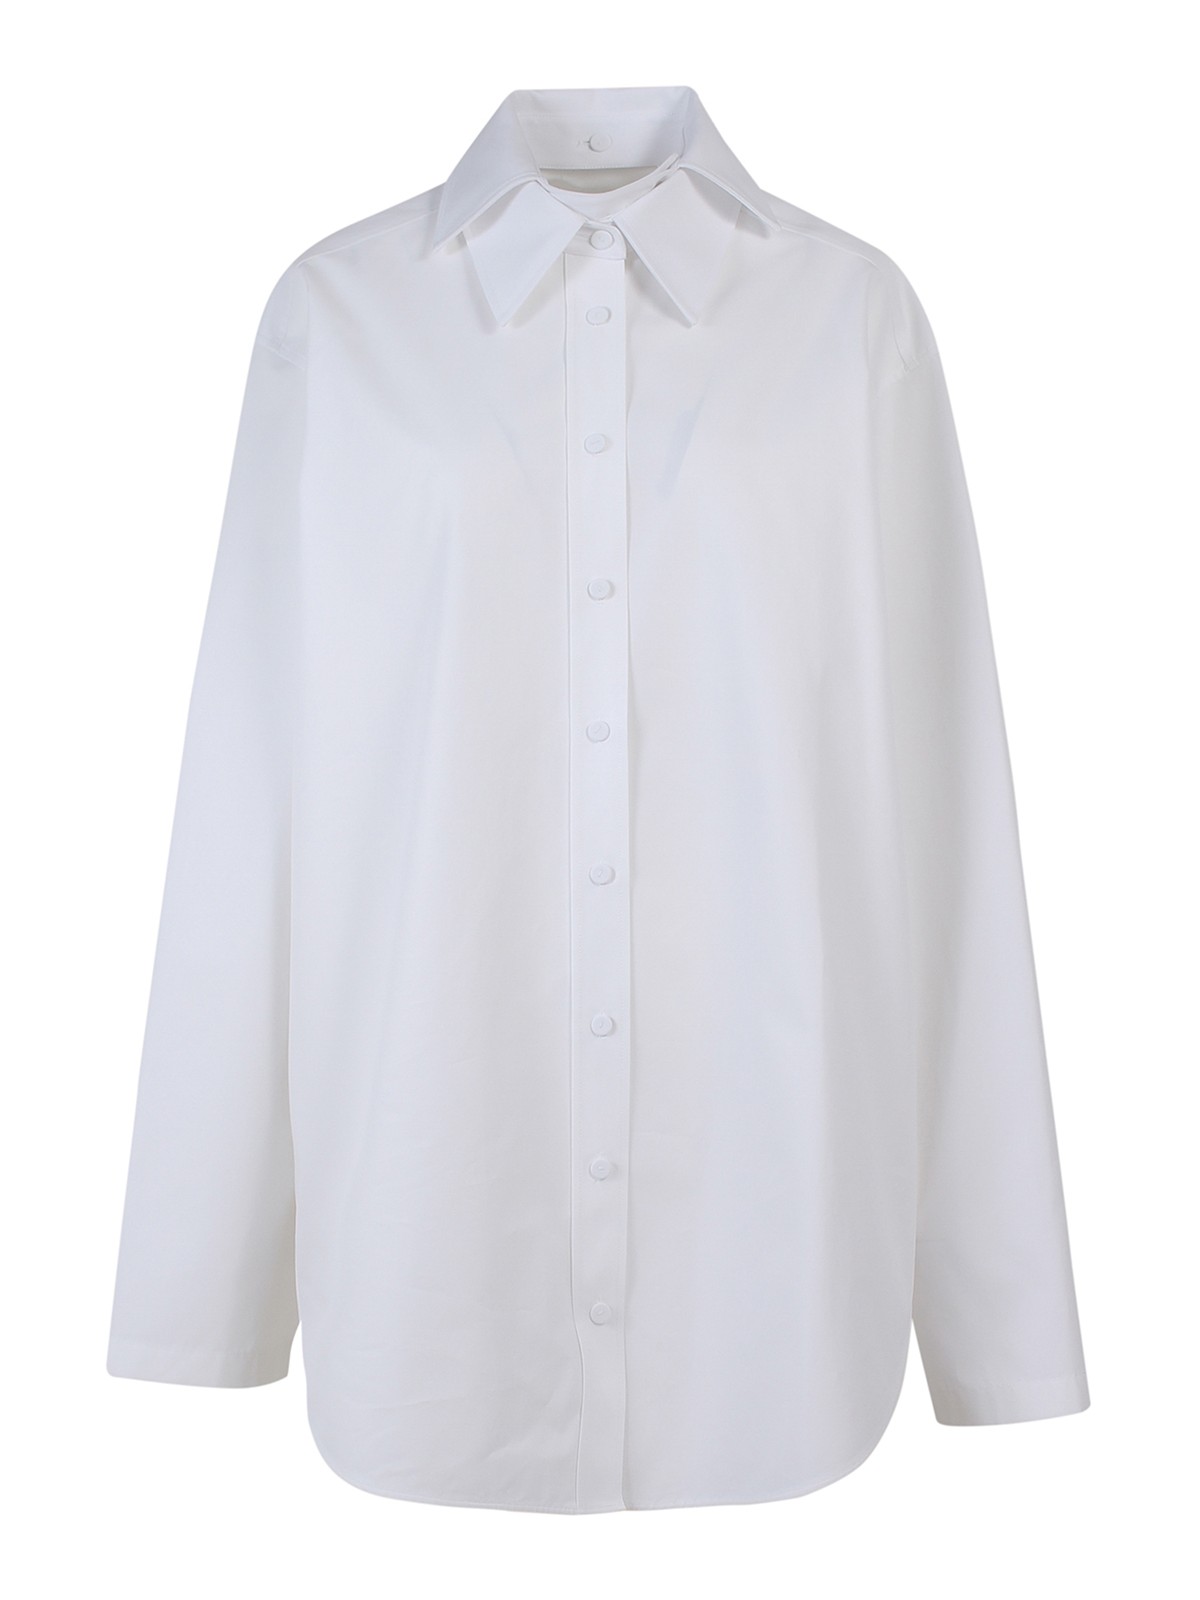 Cotton shirt with double collar